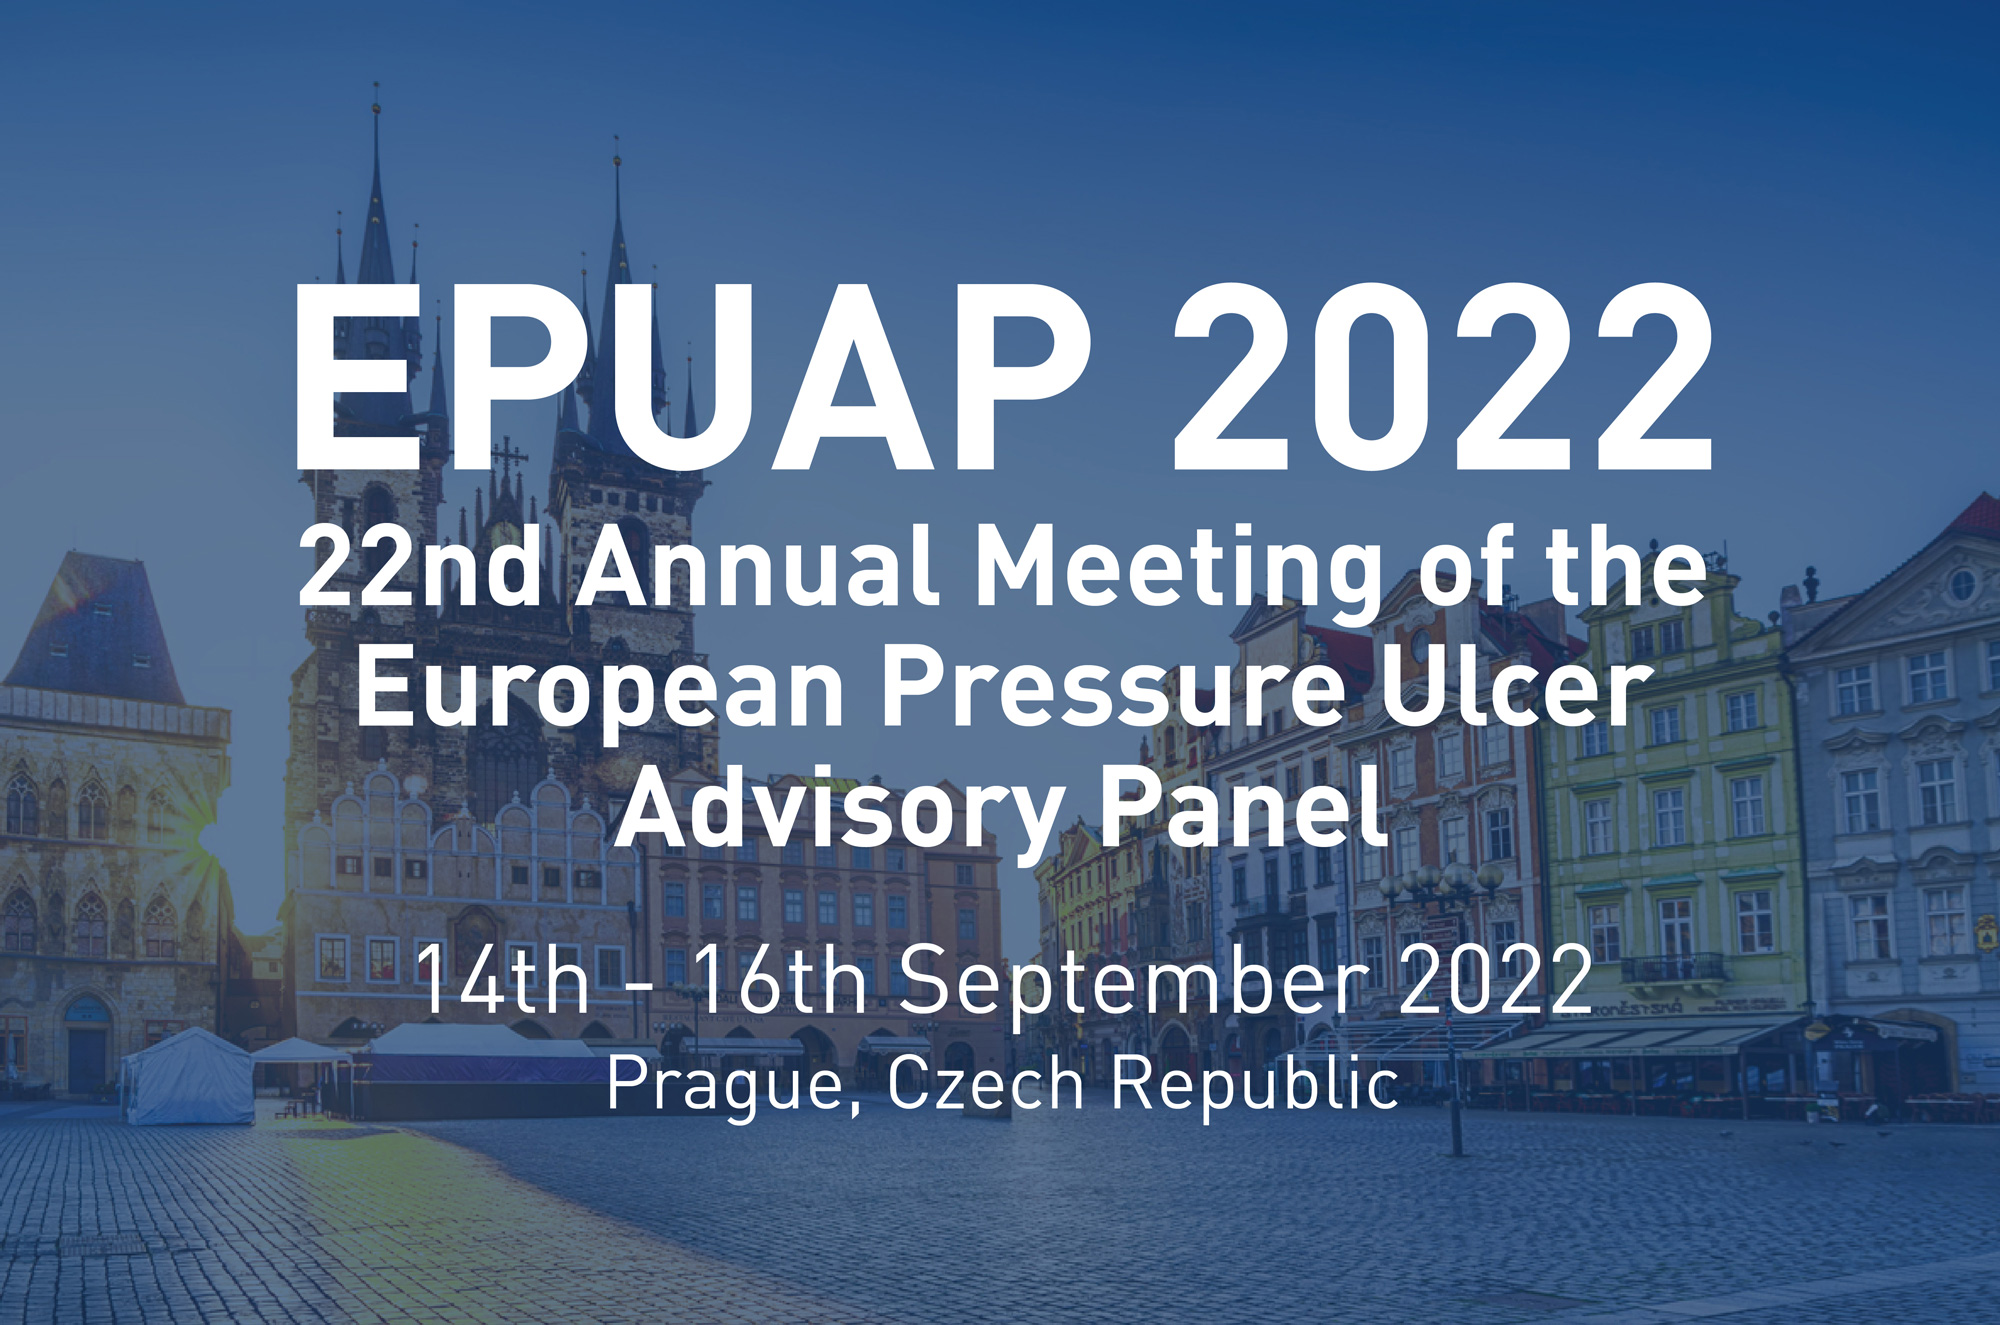 EPUAP 2022 22nd annual meeting of the European Pressure Ulcer Advisory Panel